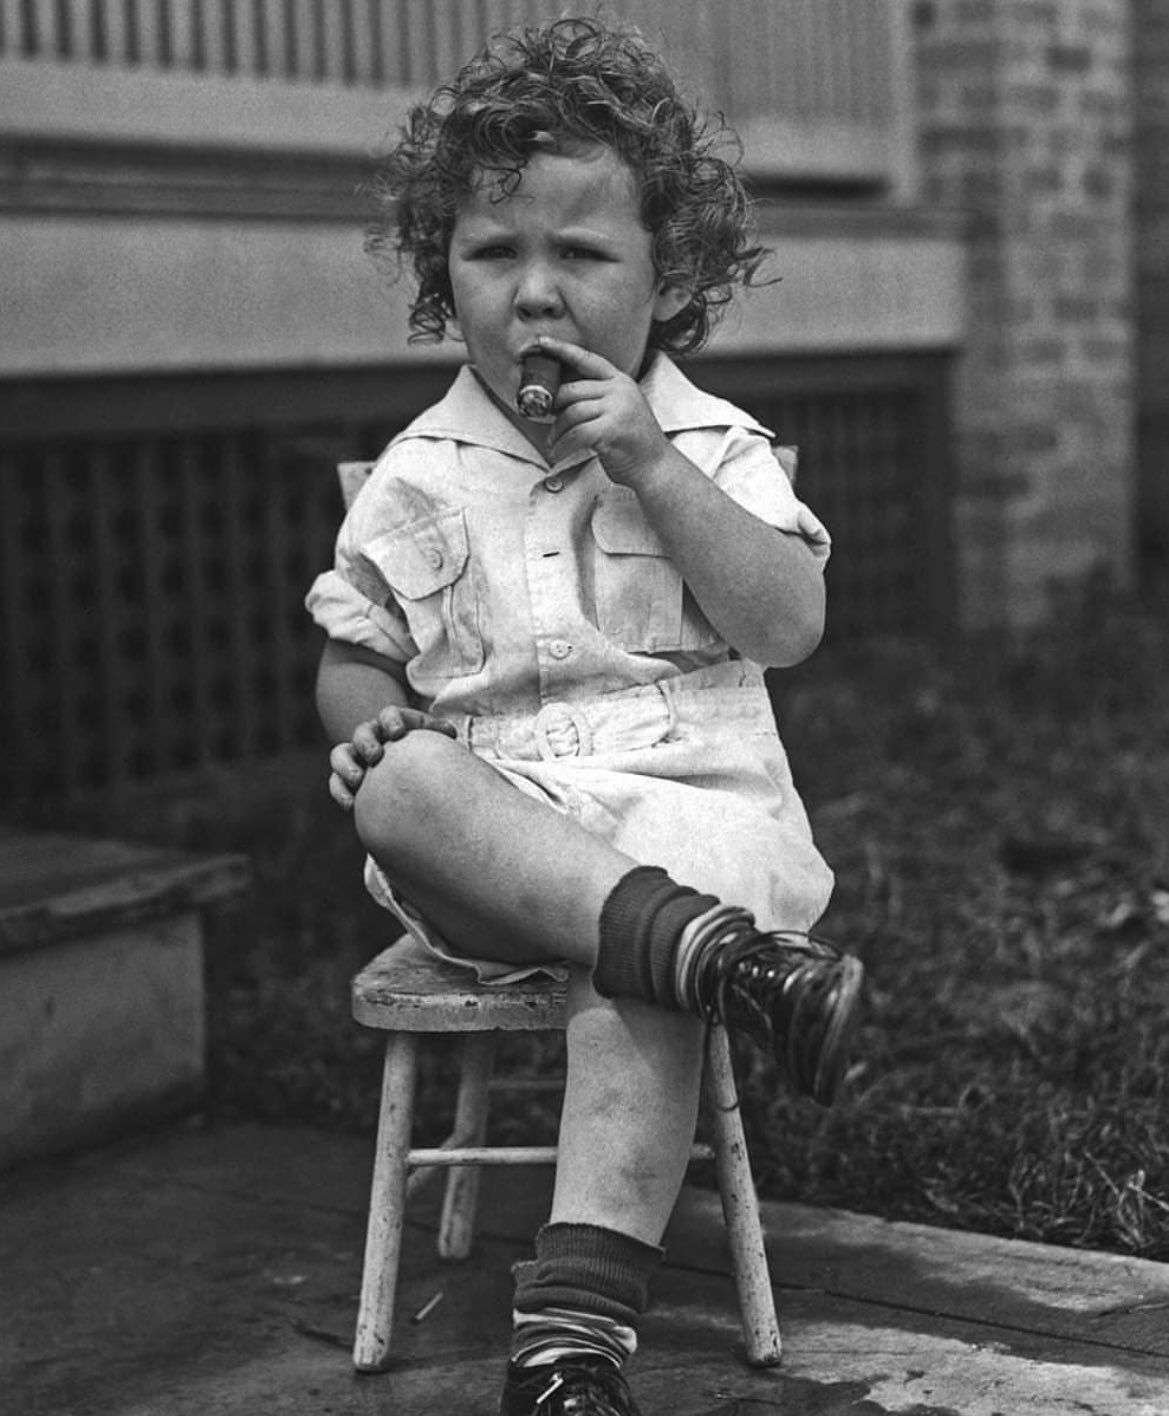 Three year-old Winston Churchill smoking a cigar after the first day in kindergarten, Dublin, 1877.